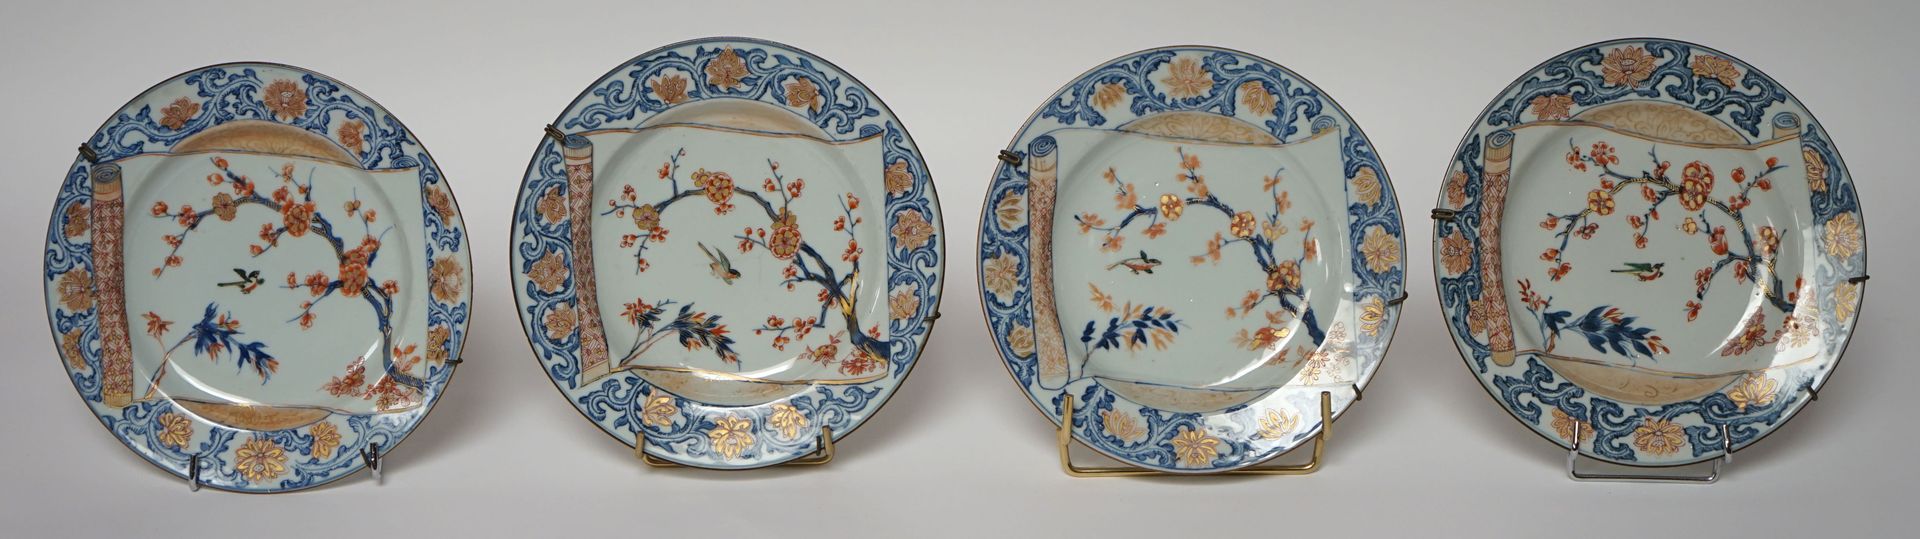 Null JAPAN, 19th century. Suite of four Imari porcelain SETS, decorated with blu&hellip;